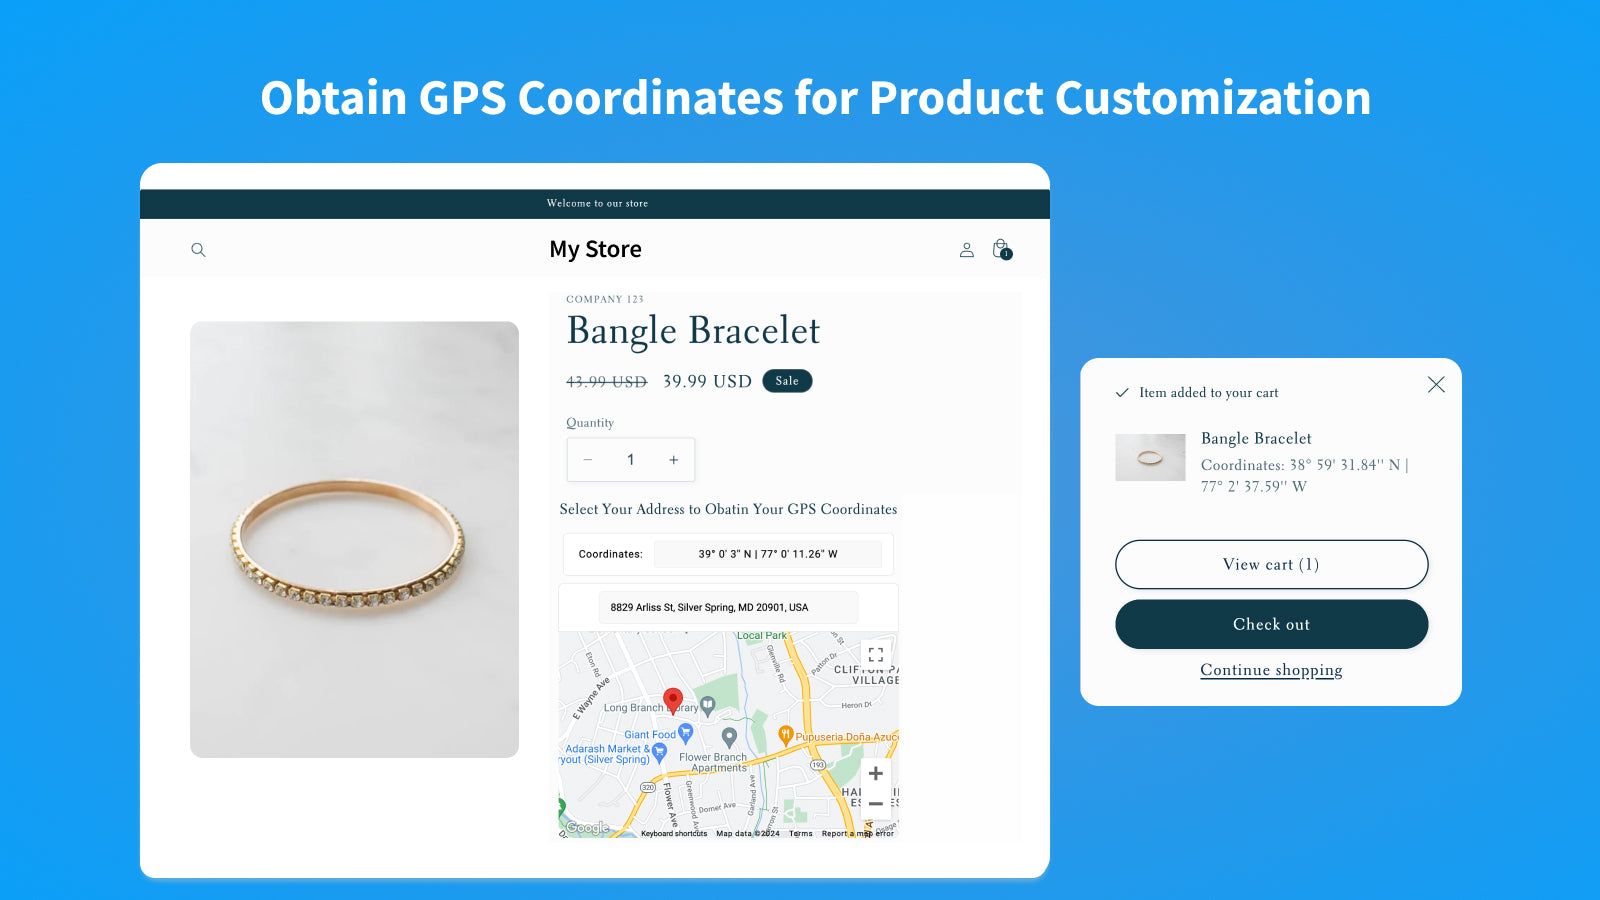 Offer Product Customization with GPS Coordinates in Product Page